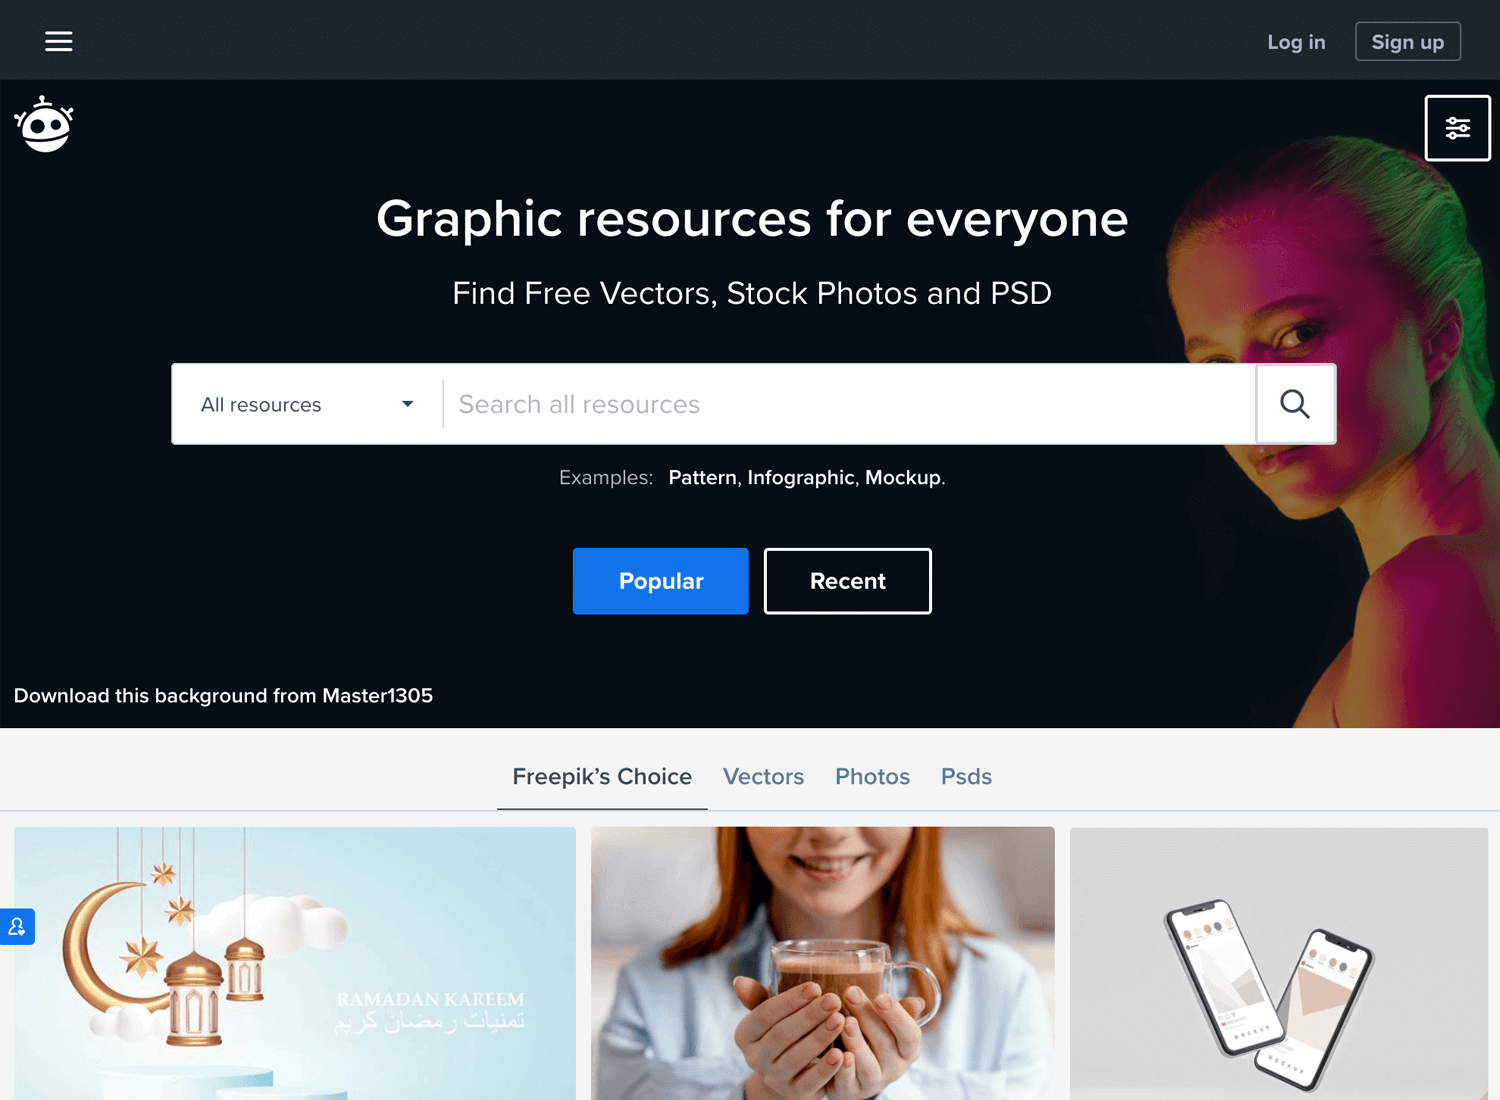 freepik as place for free resources